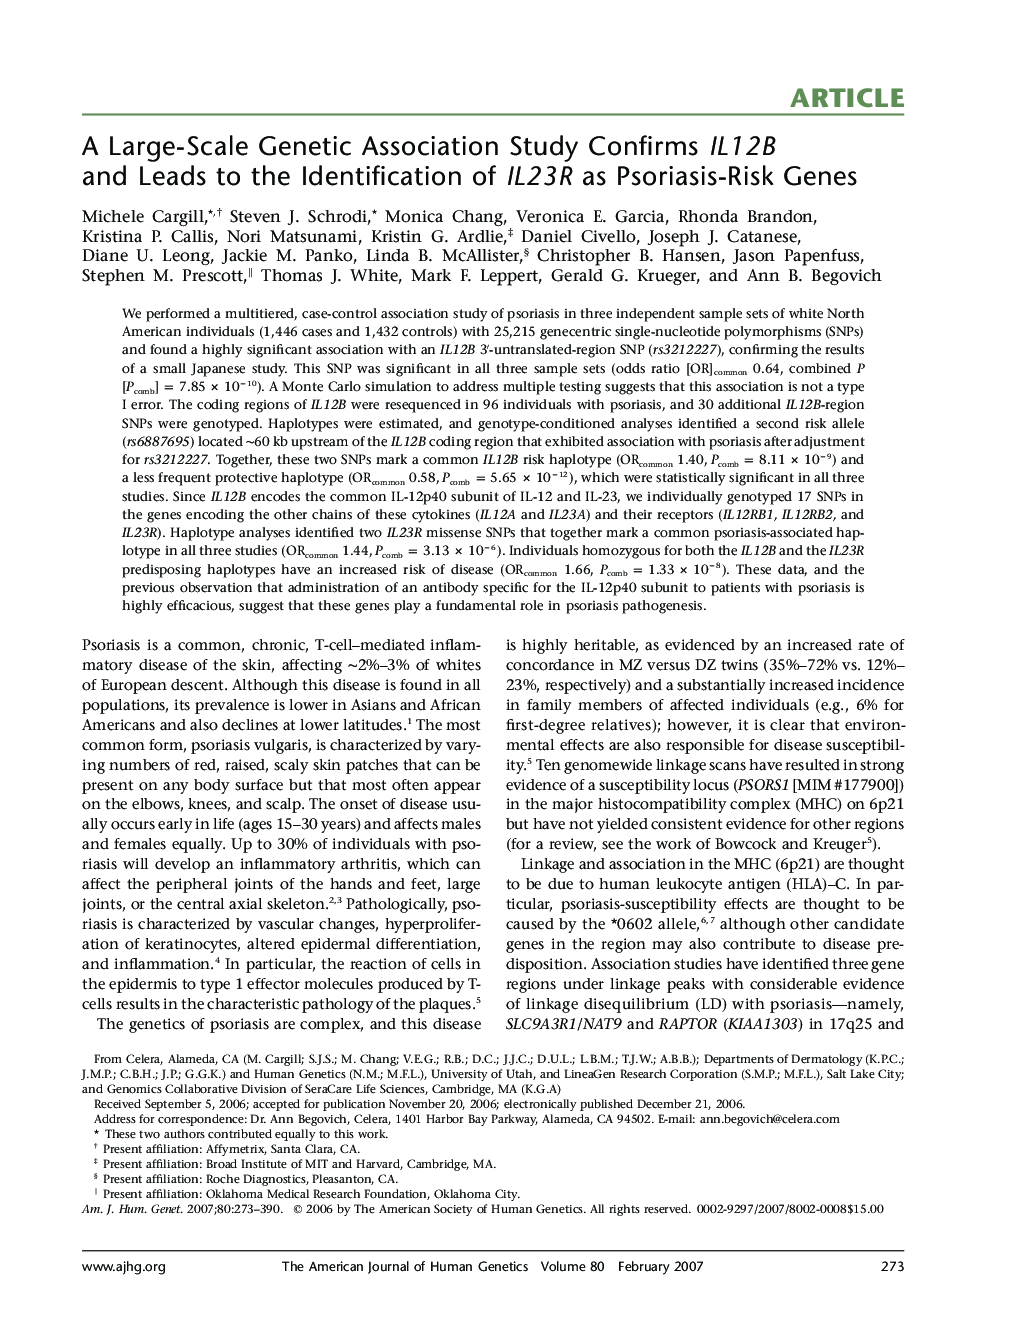 A Large-Scale Genetic Association Study Confirms IL12B and Leads to the Identification of IL23R as Psoriasis-Risk Genes